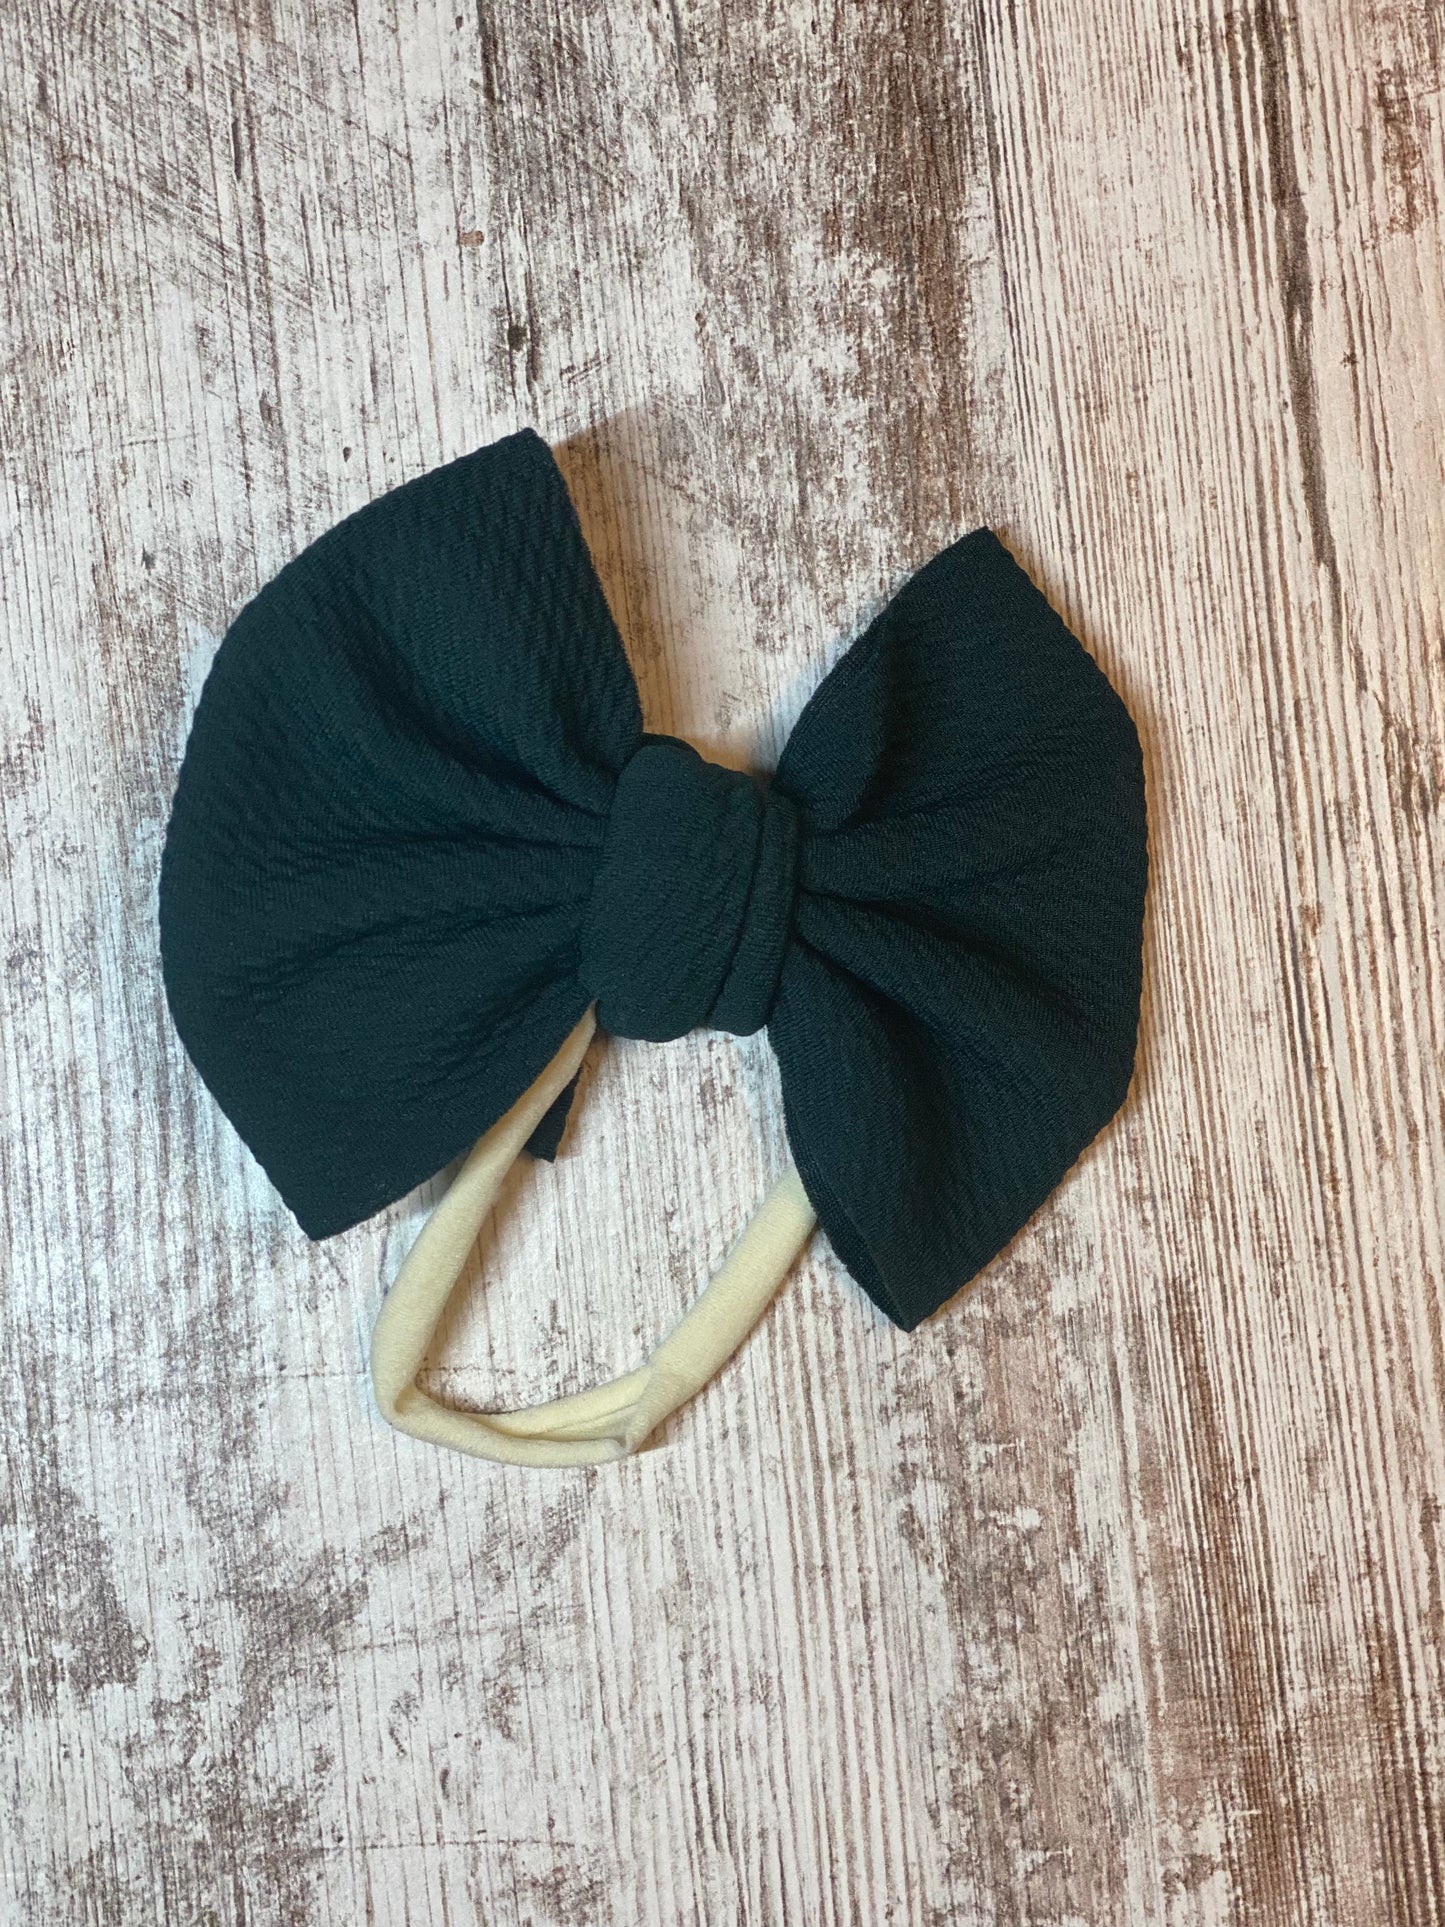 Teal Baby Bow